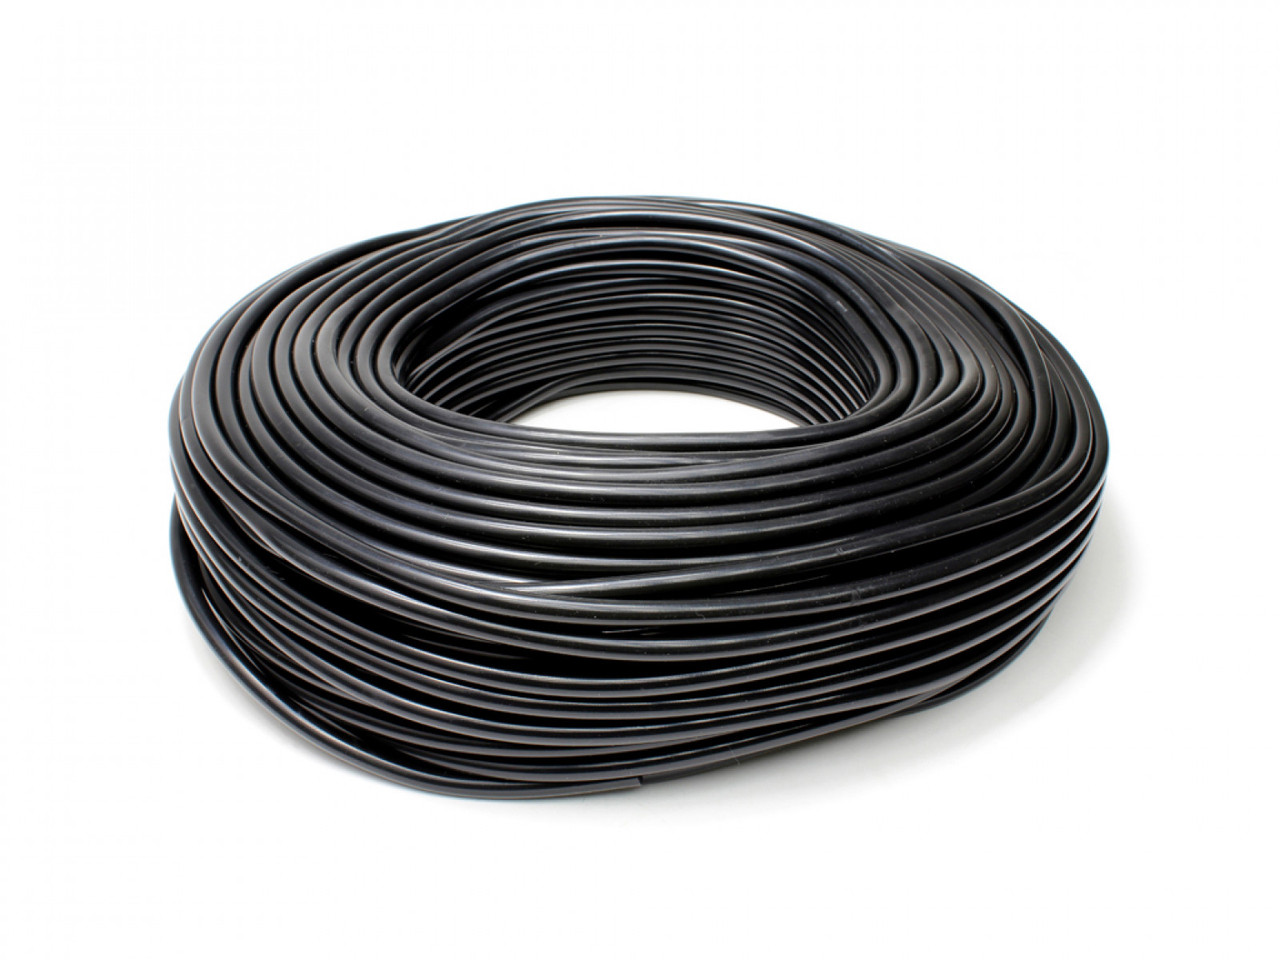 HPS 1/8" (3mm) ID Black High Temp Silicone Vacuum Hose w/ 1.5mm Wall Thickness - 100 Feet Pack (HPS-HTSVH3TW-BLKx100)